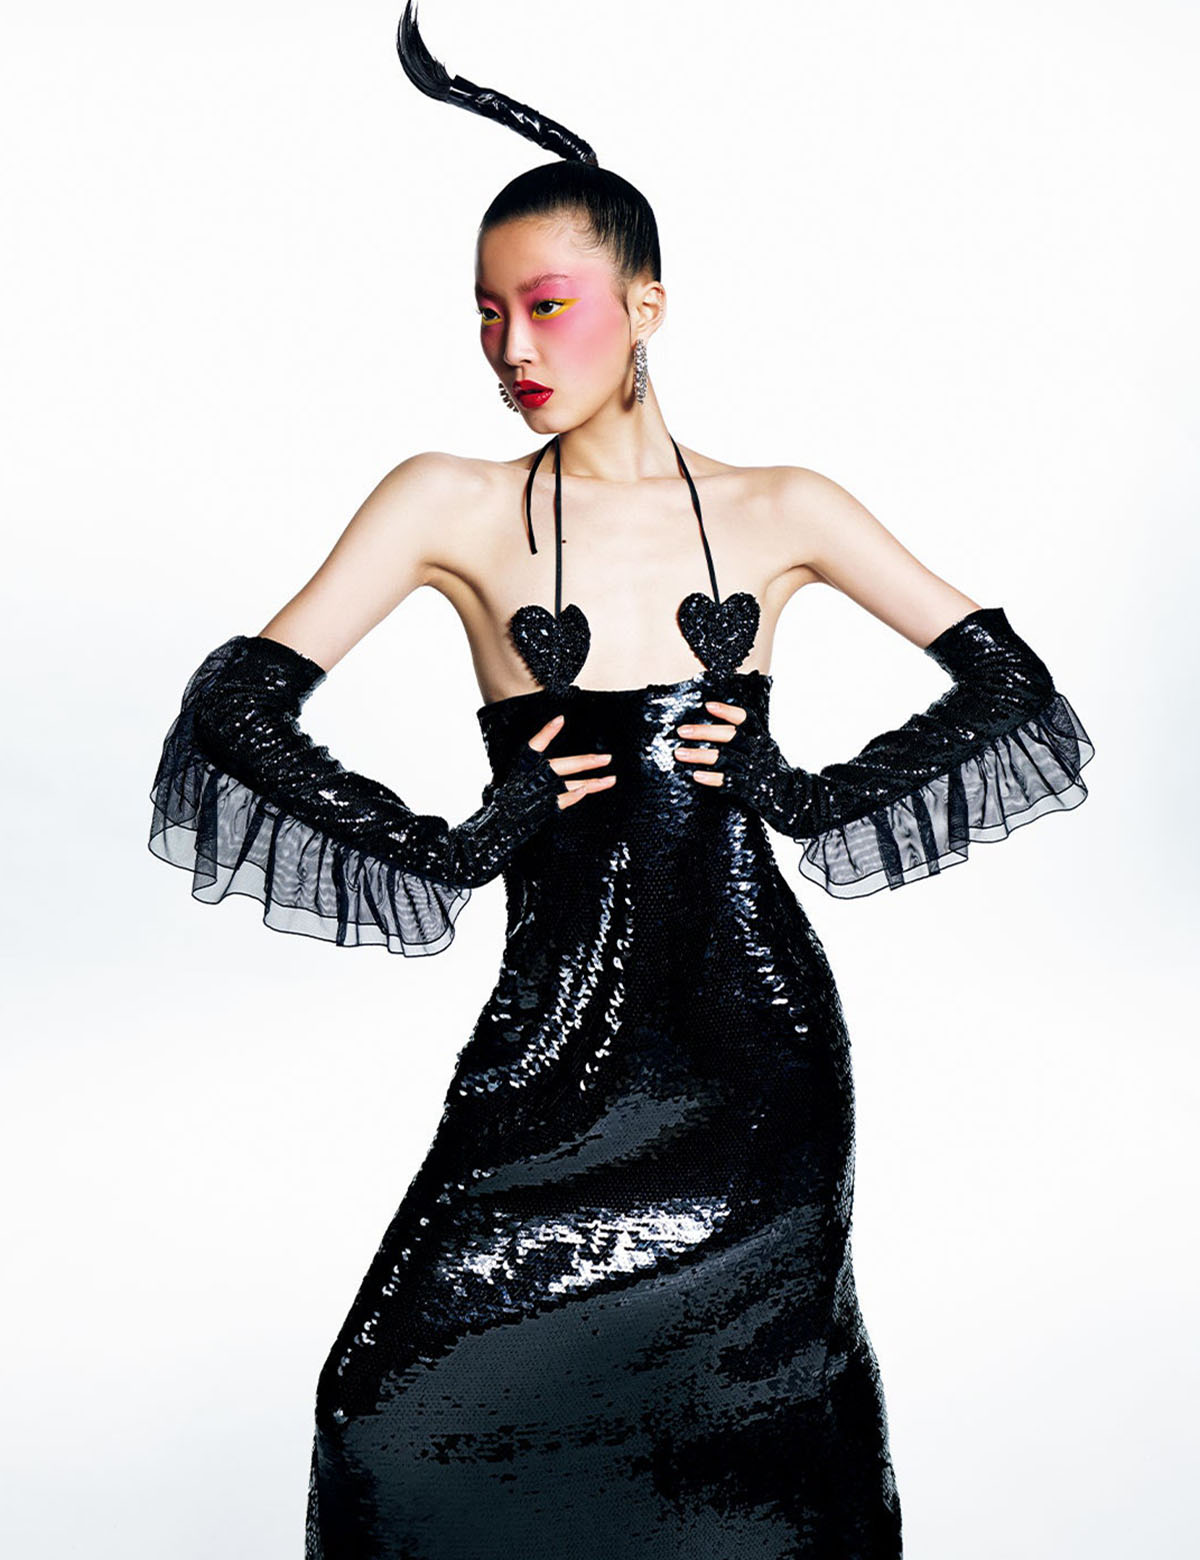 ''Let's Dress Up'' by Luigi & Iango for Vogue Japan August 2021